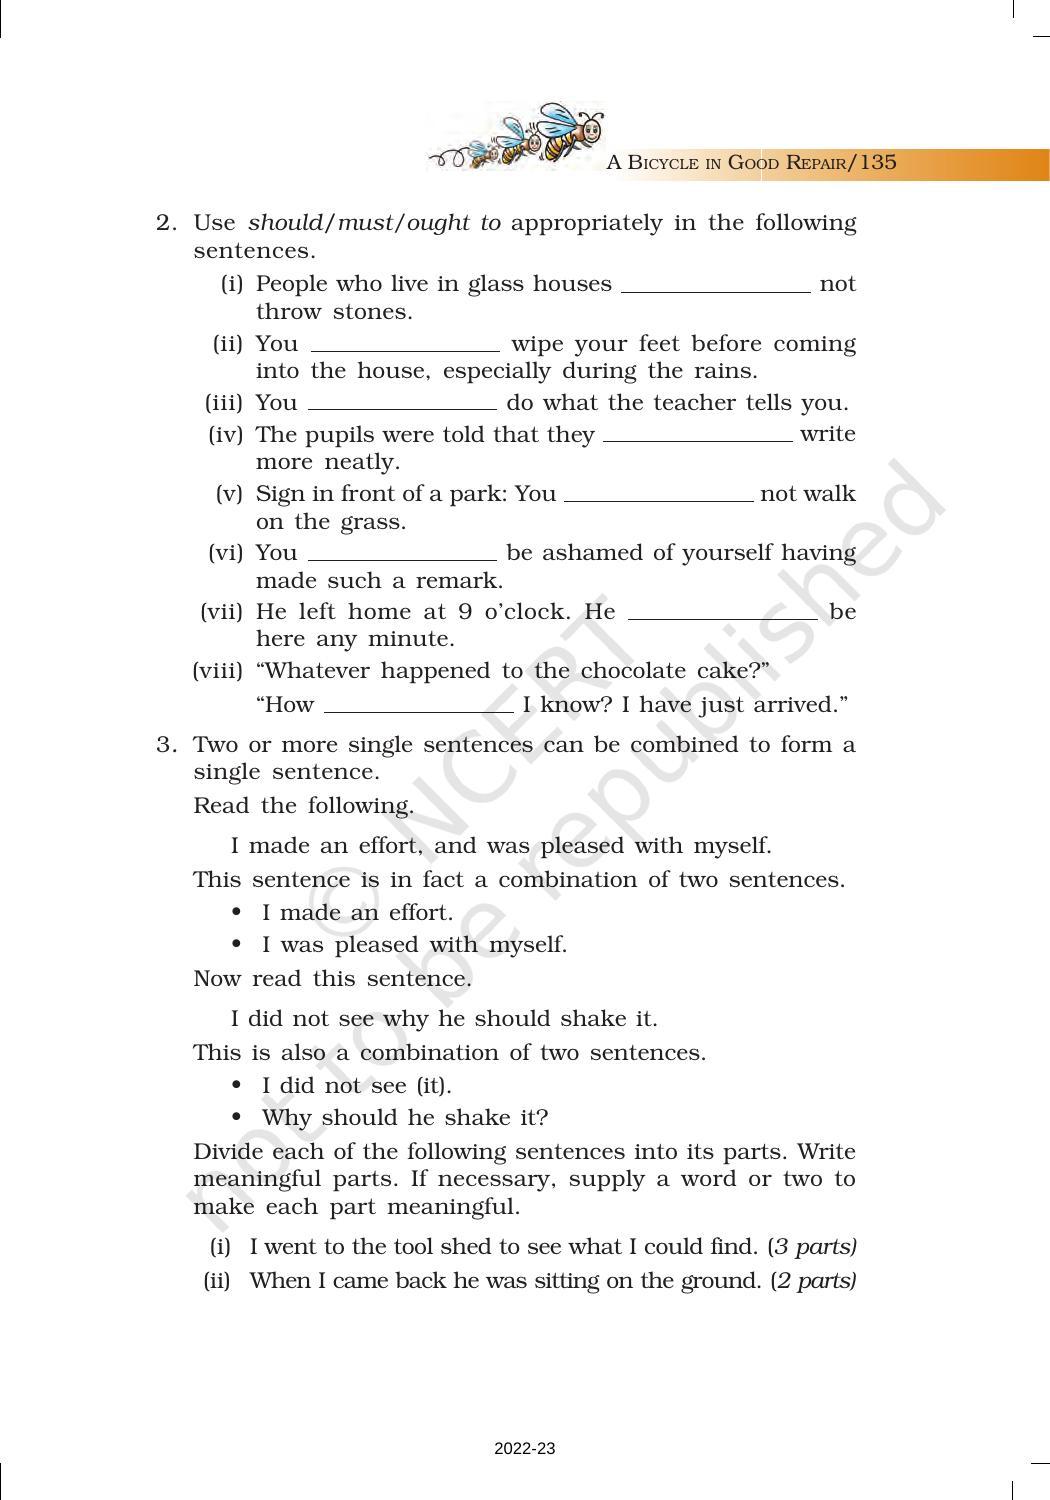 NCERT Book for Class 7 English (Honeycomb): Chapter 9-A Bicycle in Good Repair - Page 10